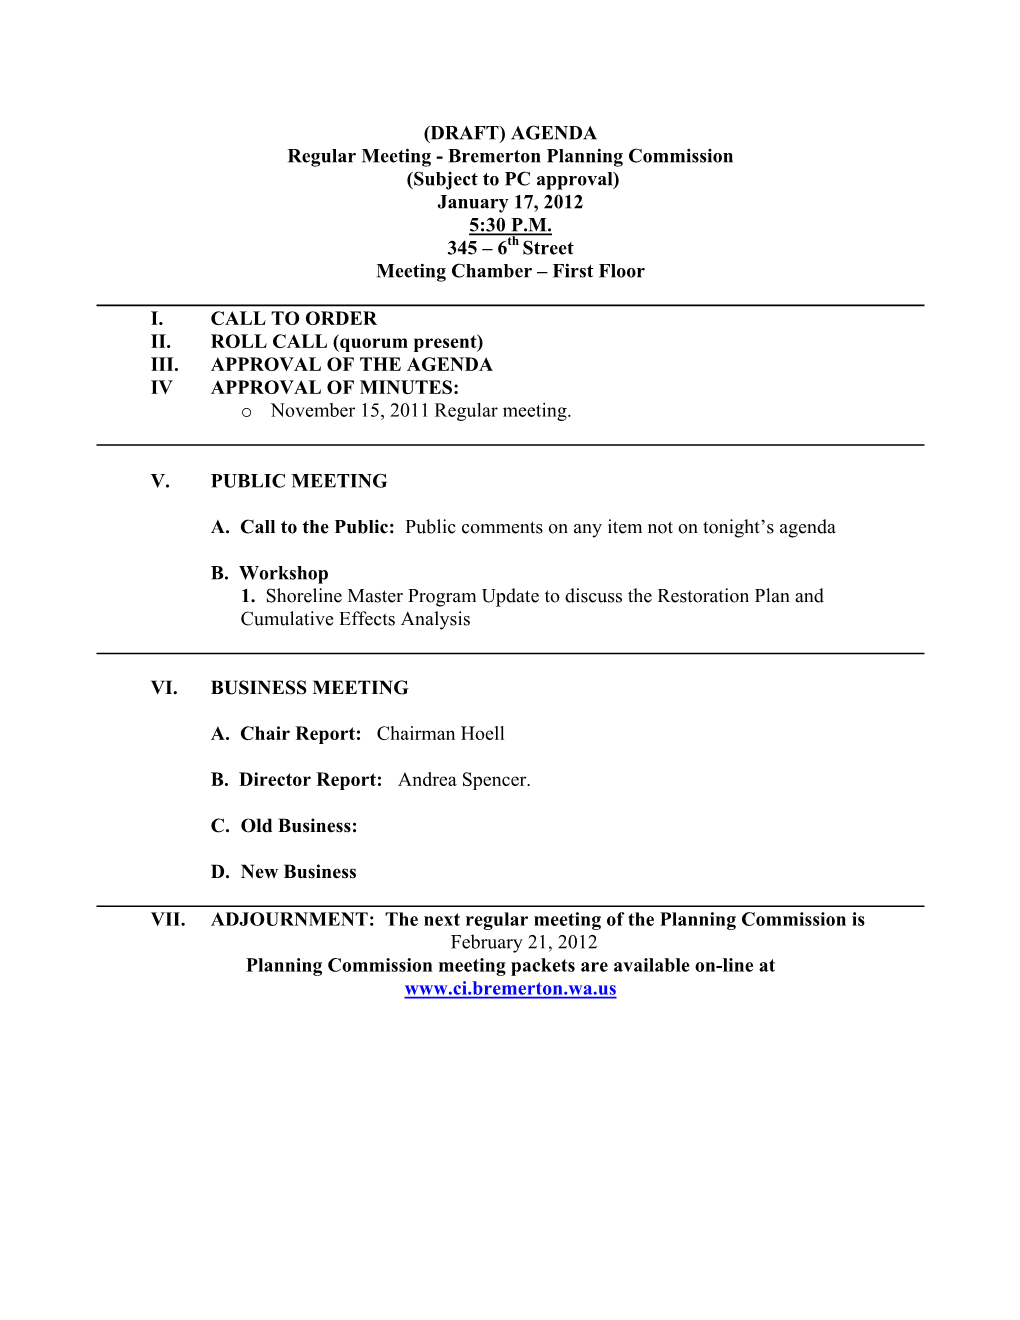 Bremerton Planning Commission (Subject to PC Approval) January 17, 2012 5:30 P.M